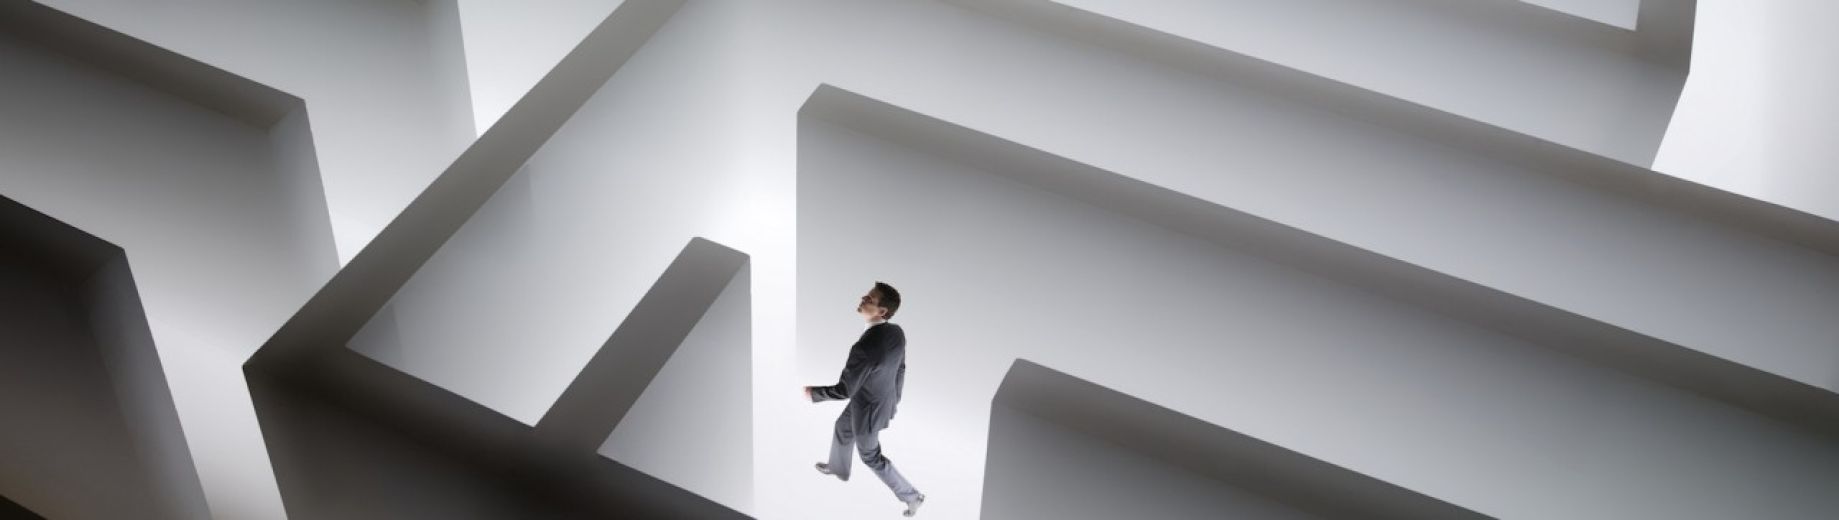 Graphic of a man in a suit walking around a maze